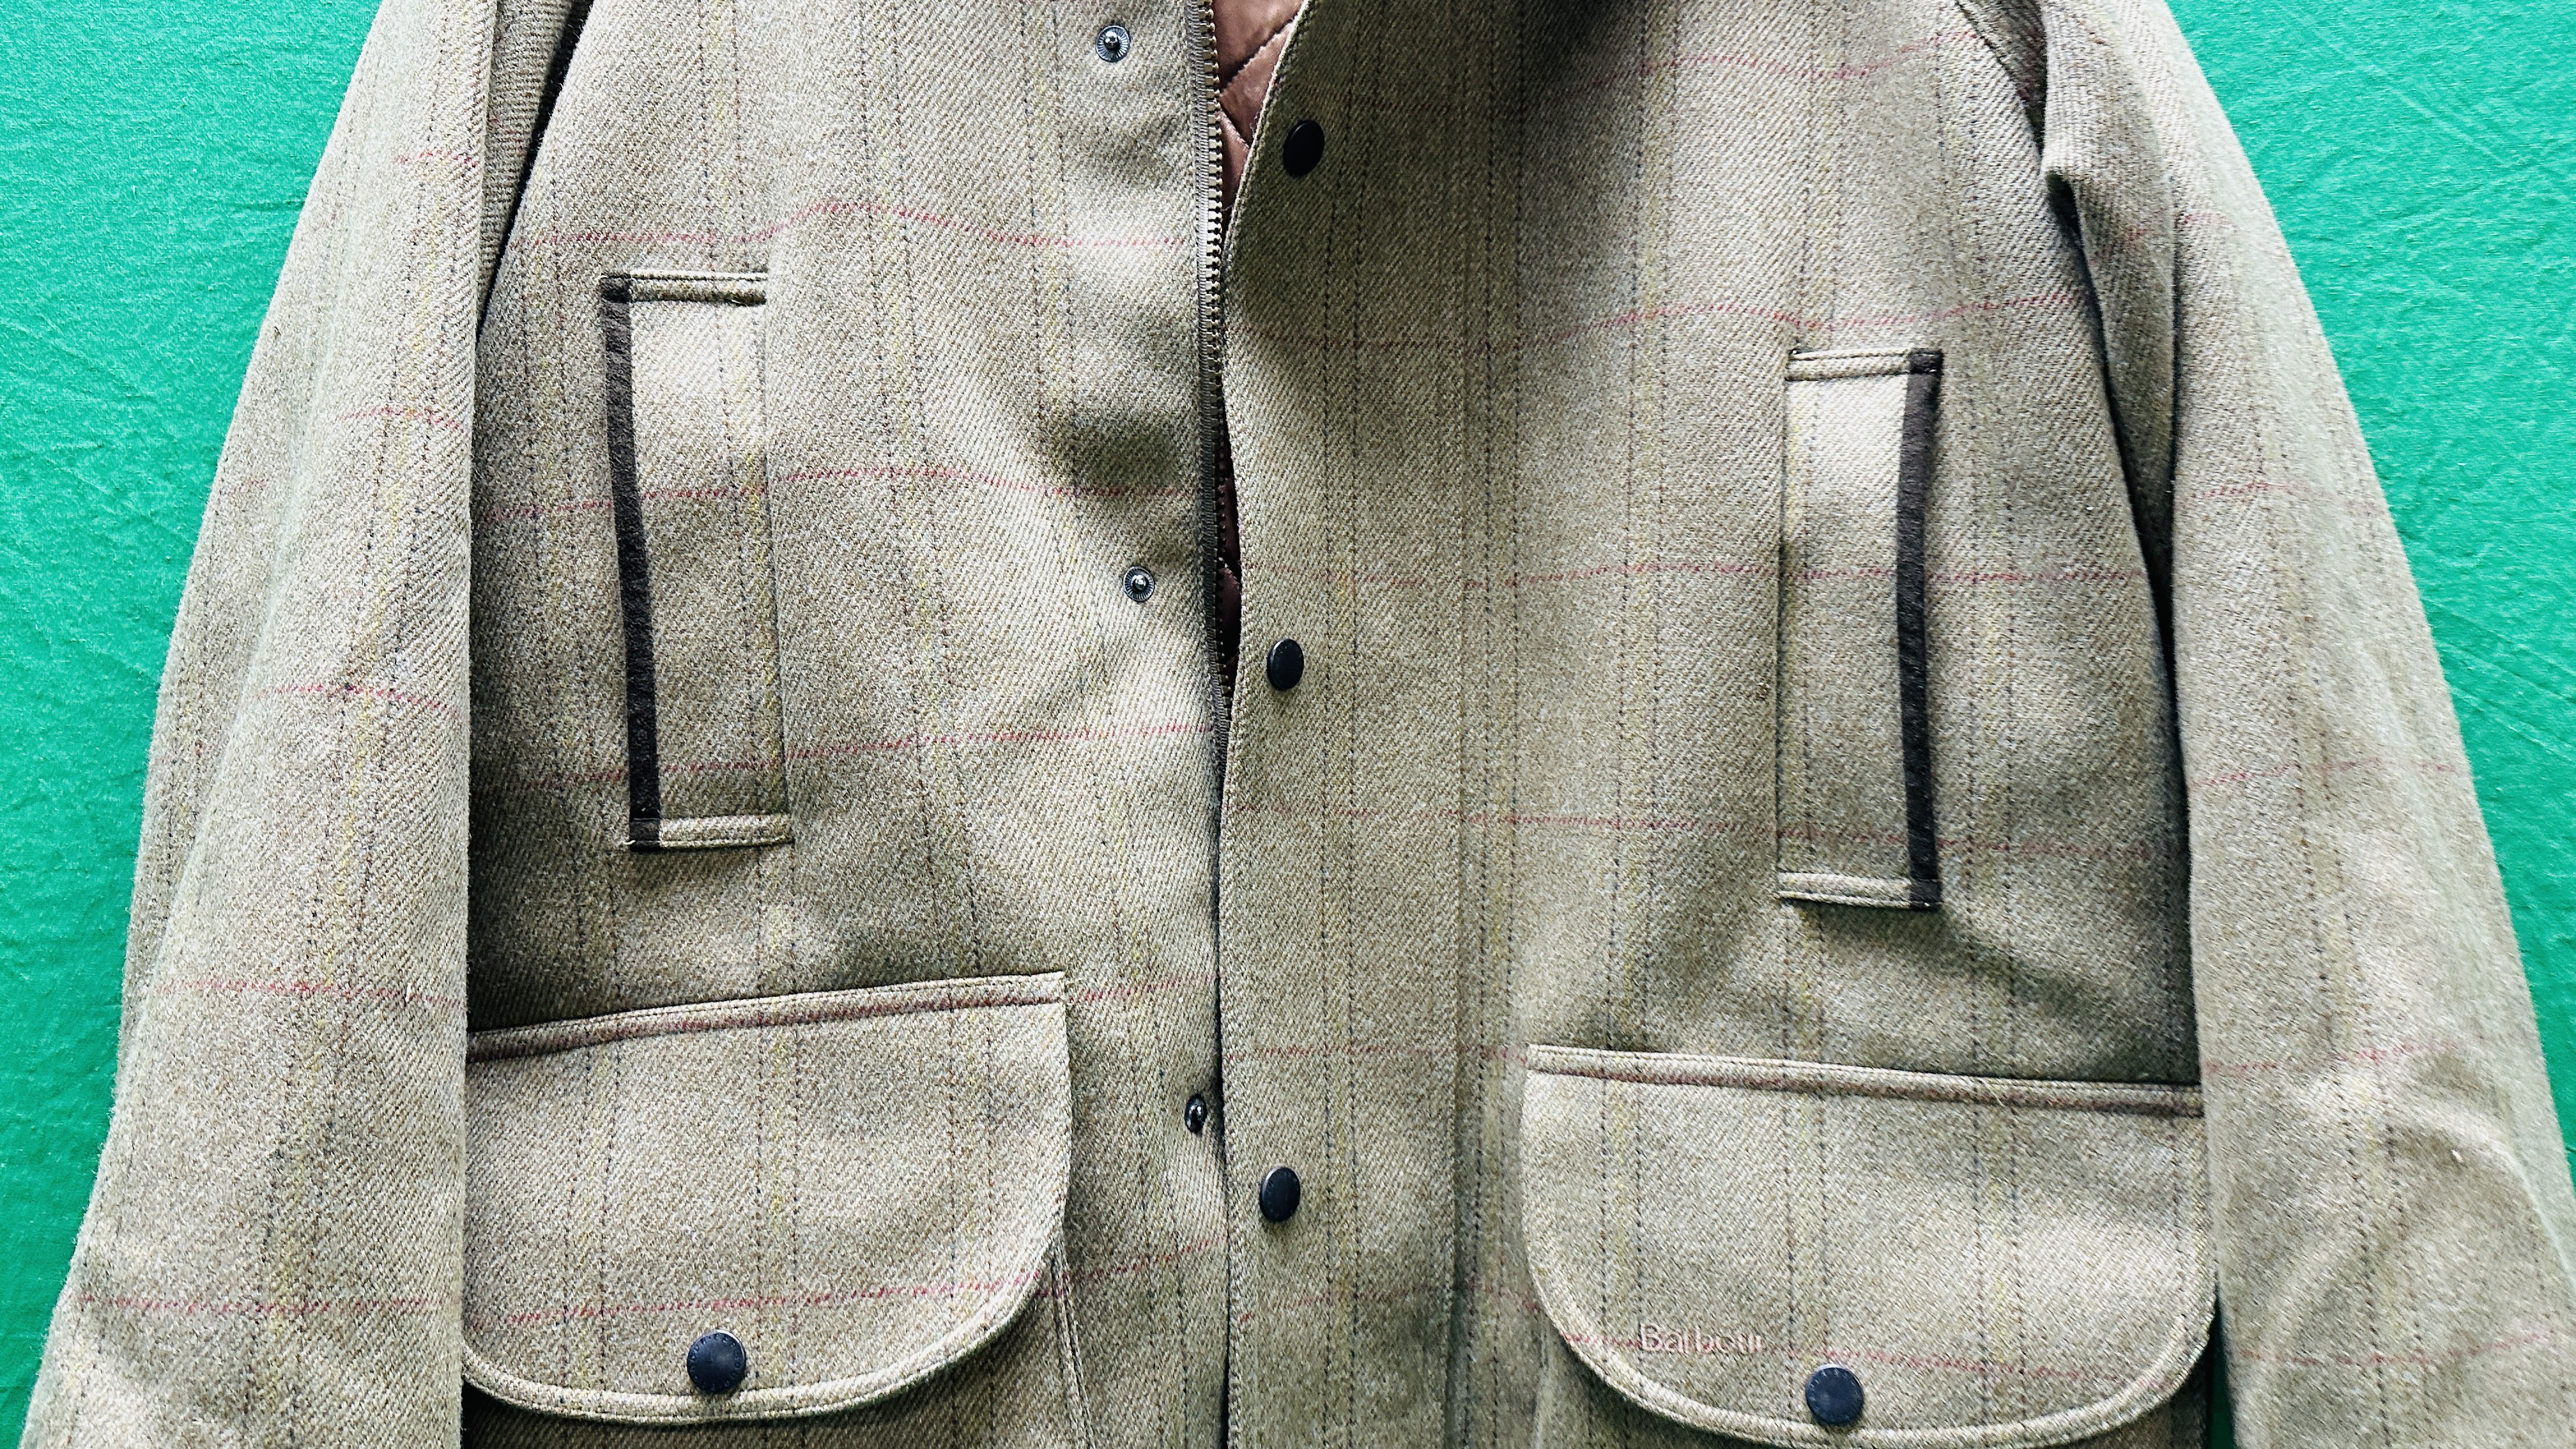 BARBOUR DOUBLE TWIST 100% MERINO 2 PLY TWEED COUNTRY COAT, STYLE T19, - Image 4 of 11